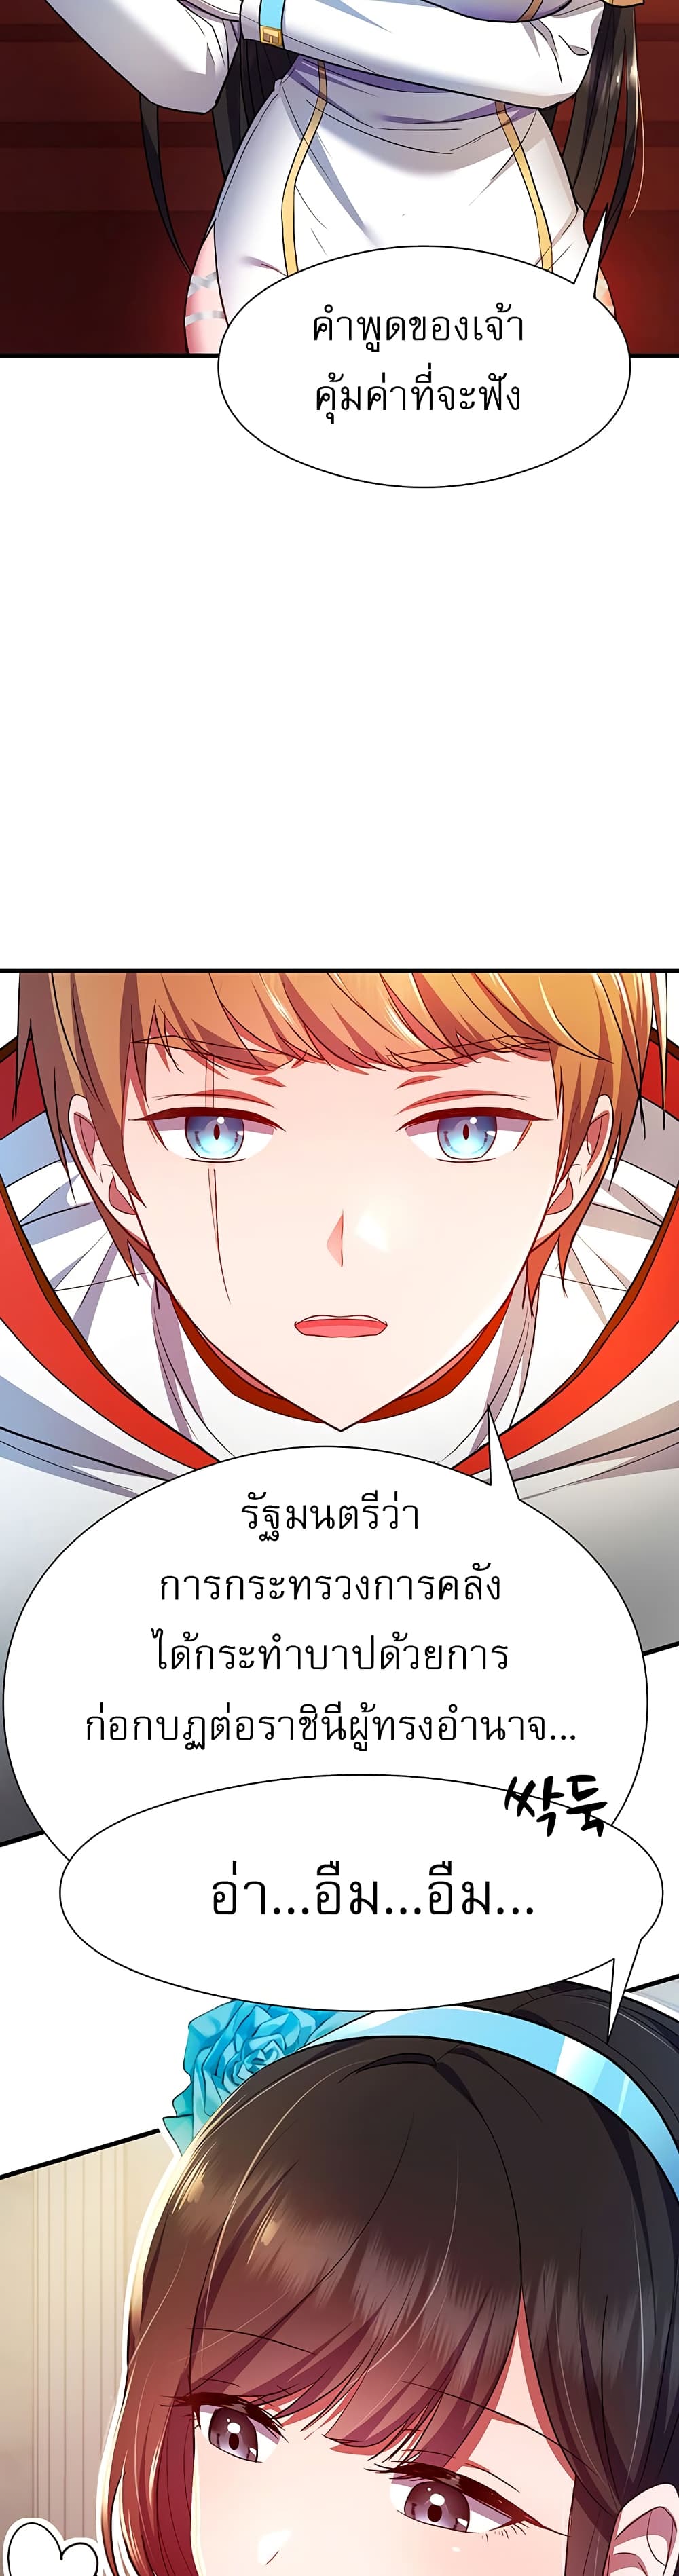 Taming an Evil Young Lady ตอนที่ 1 ภาพ 18